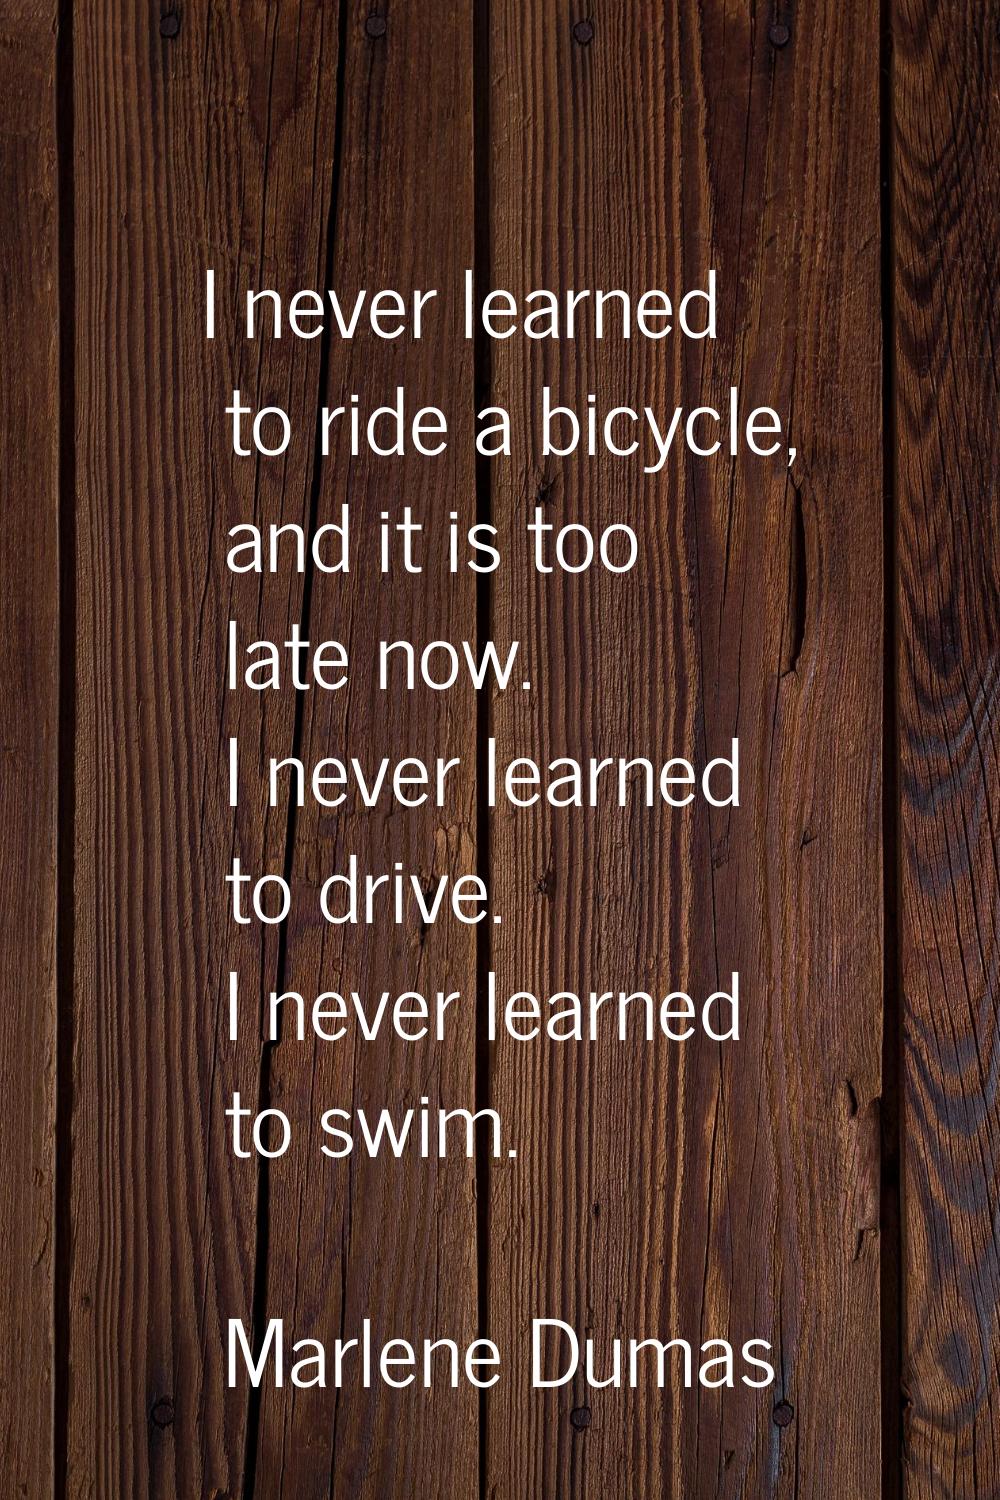 I never learned to ride a bicycle, and it is too late now. I never learned to drive. I never learne